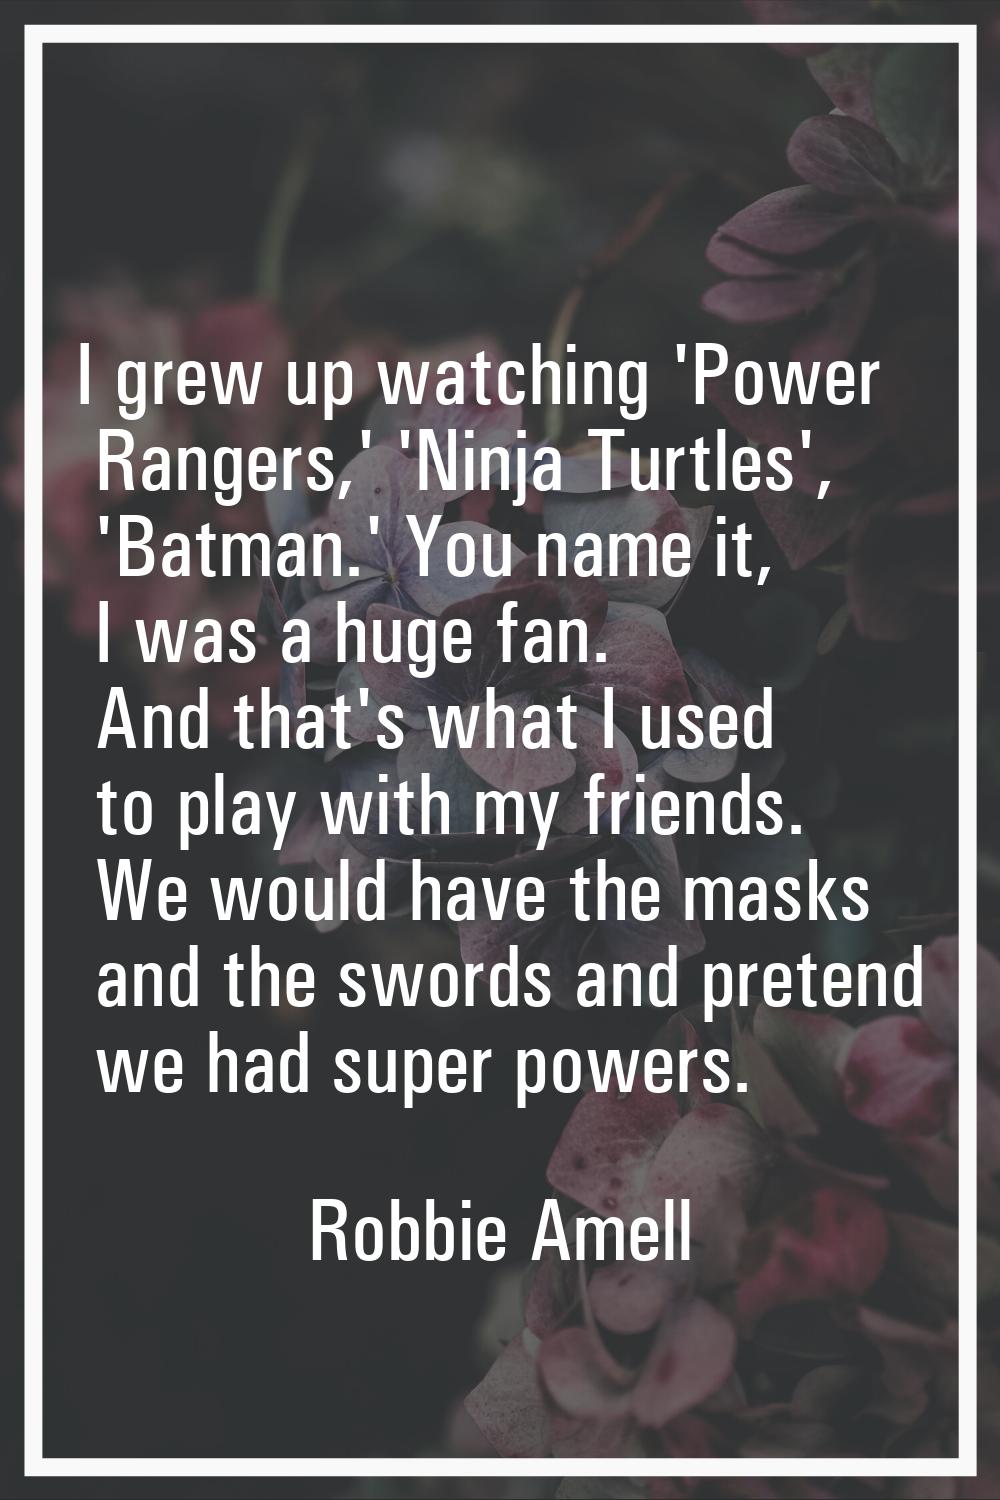 I grew up watching 'Power Rangers,' 'Ninja Turtles', 'Batman.' You name it, I was a huge fan. And t